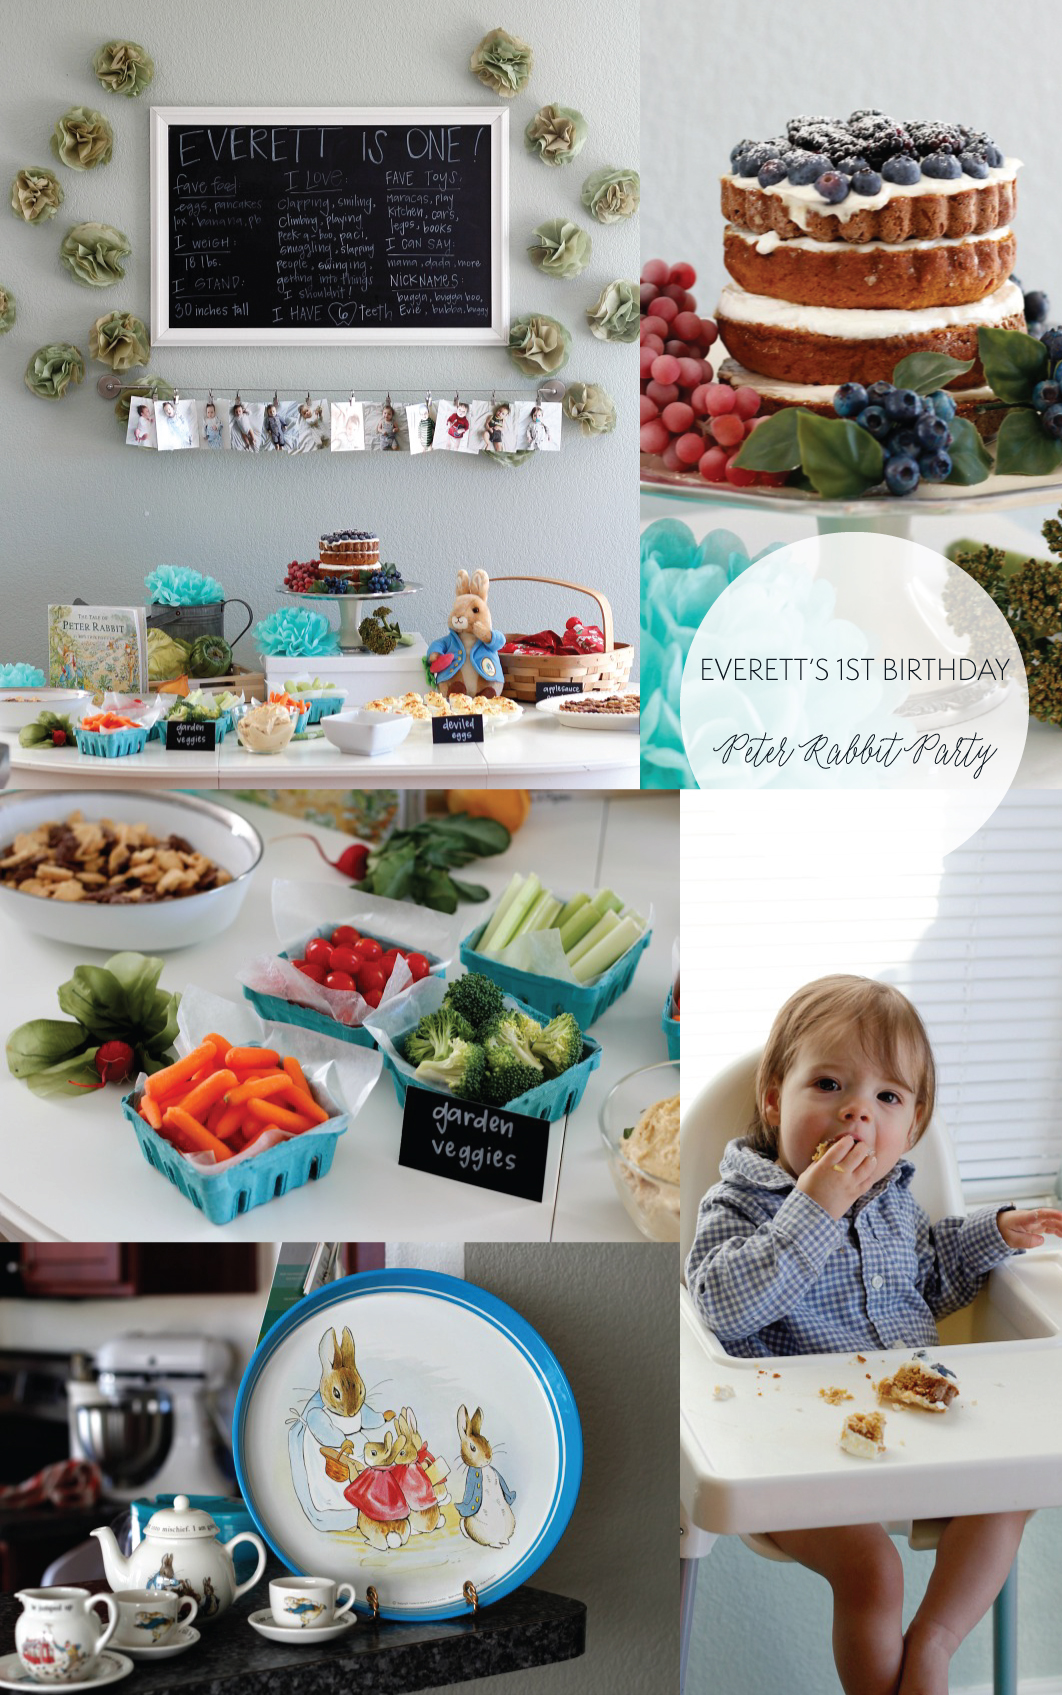 Peter Rabbit Baby Shower - My Practical Baby Shower Guide